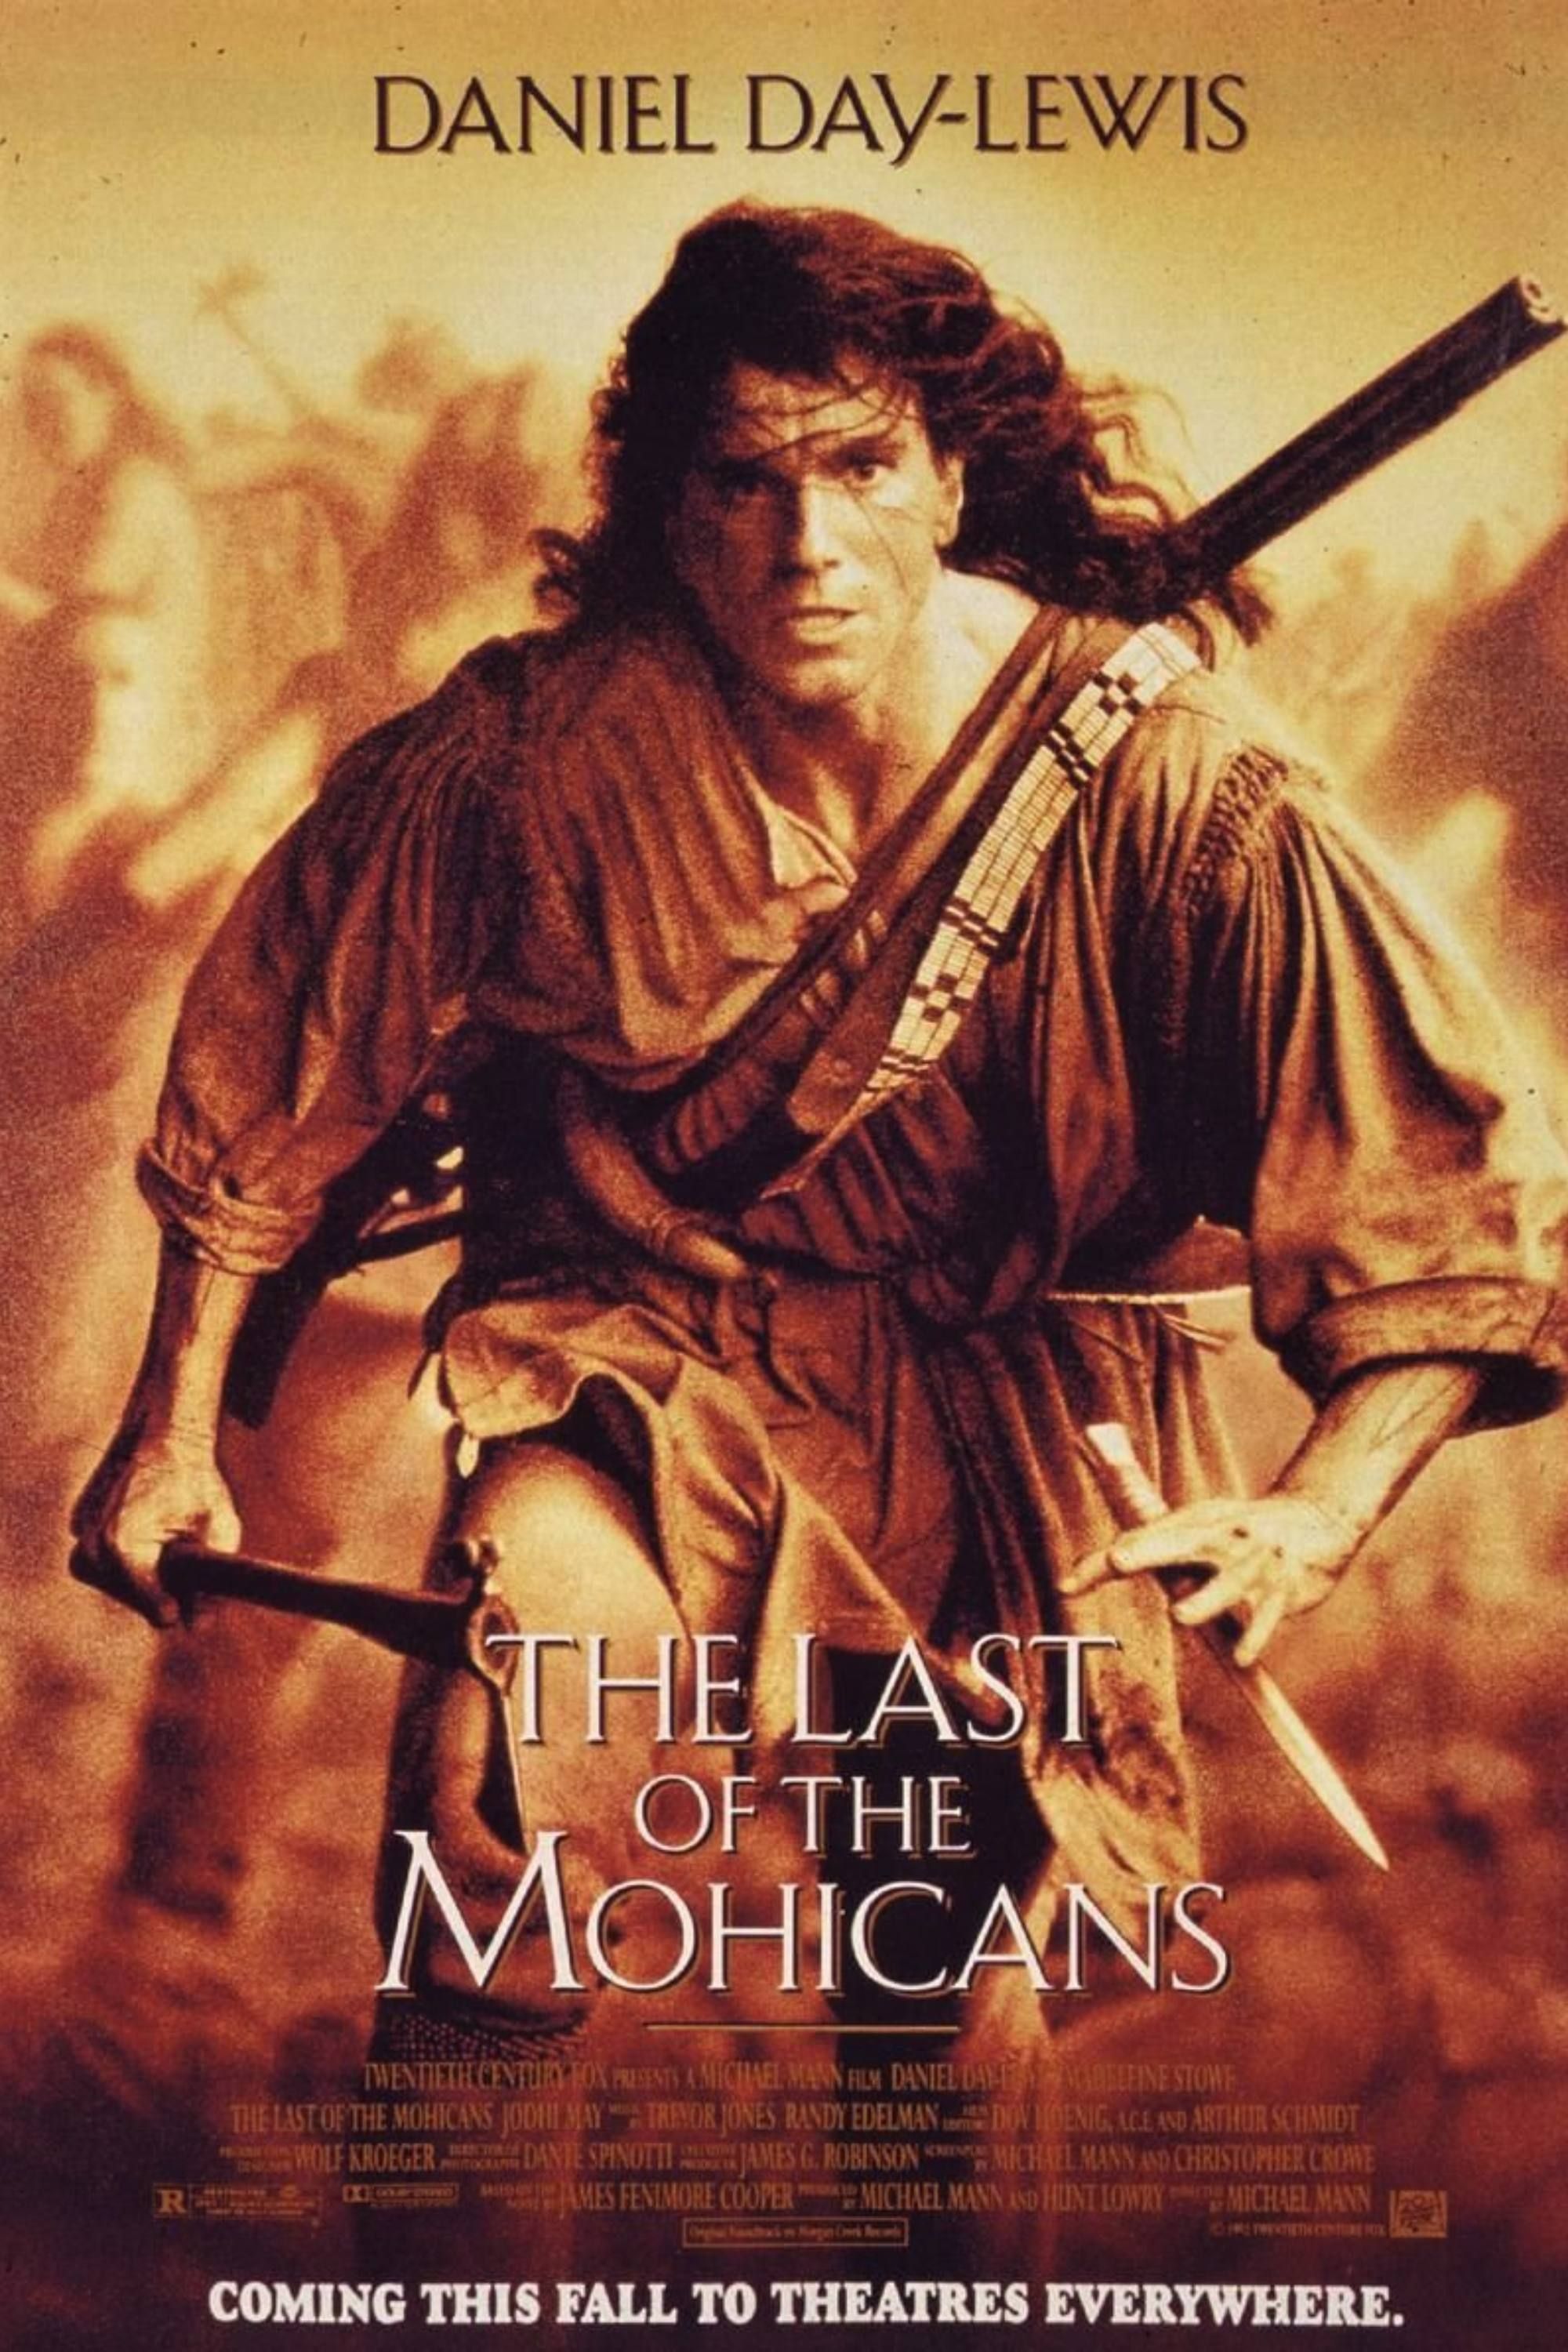 The Last Of The Mohicans - Poster- Daniel Day-Lewis